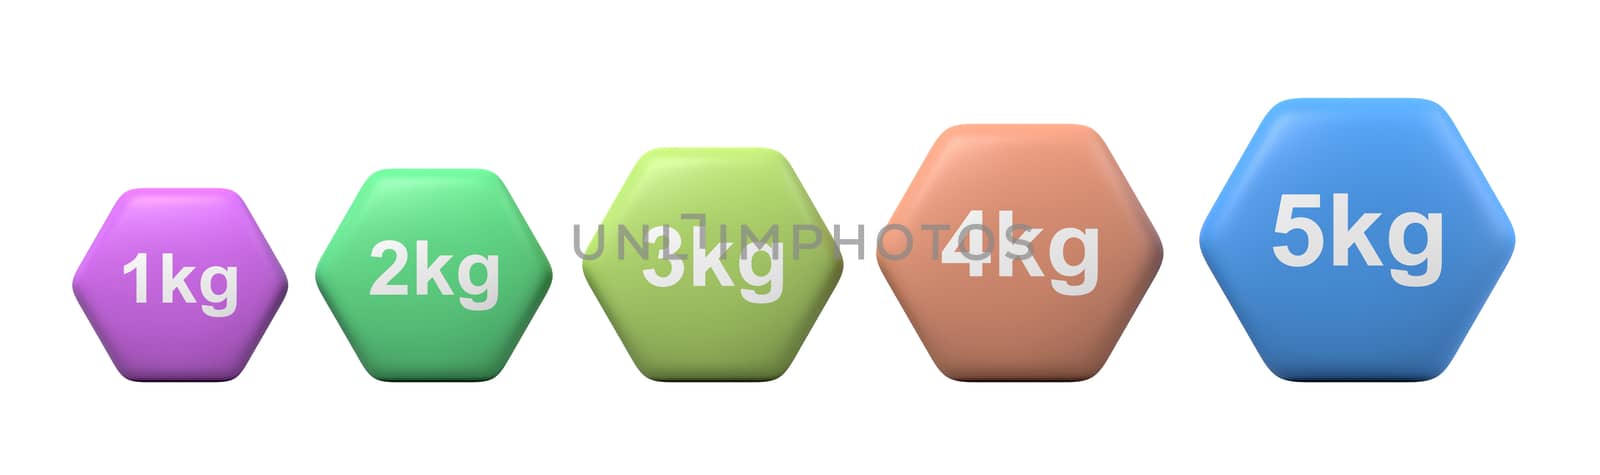 Set of Five Colorful Gym Weights 1 to 5 kilogram Isolated on White Background 3D Illustration